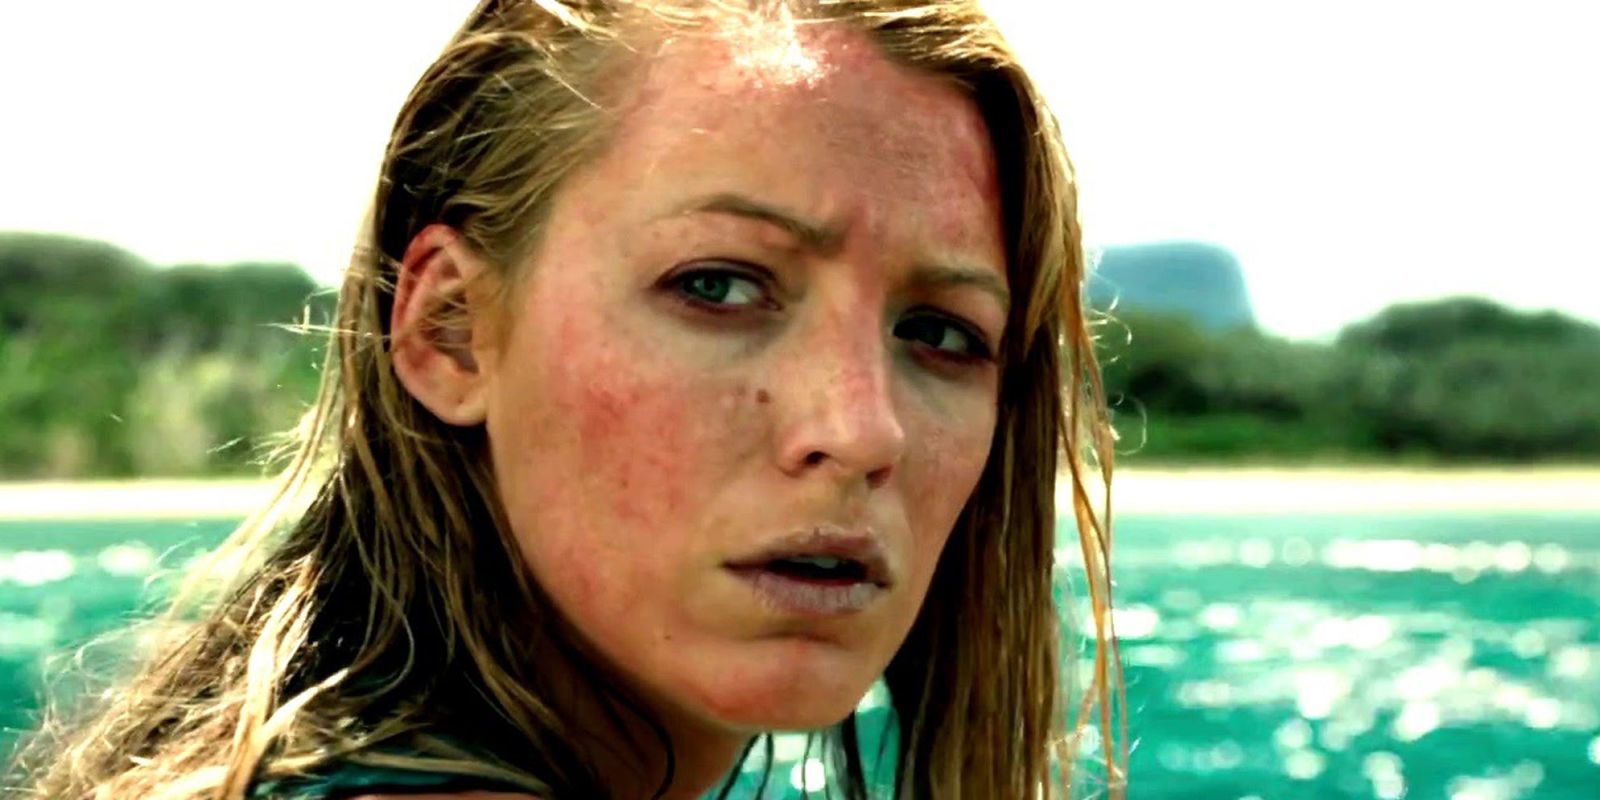 THE SHALLOWS: In Theatres June 24 - Trailer #2 - YouTube